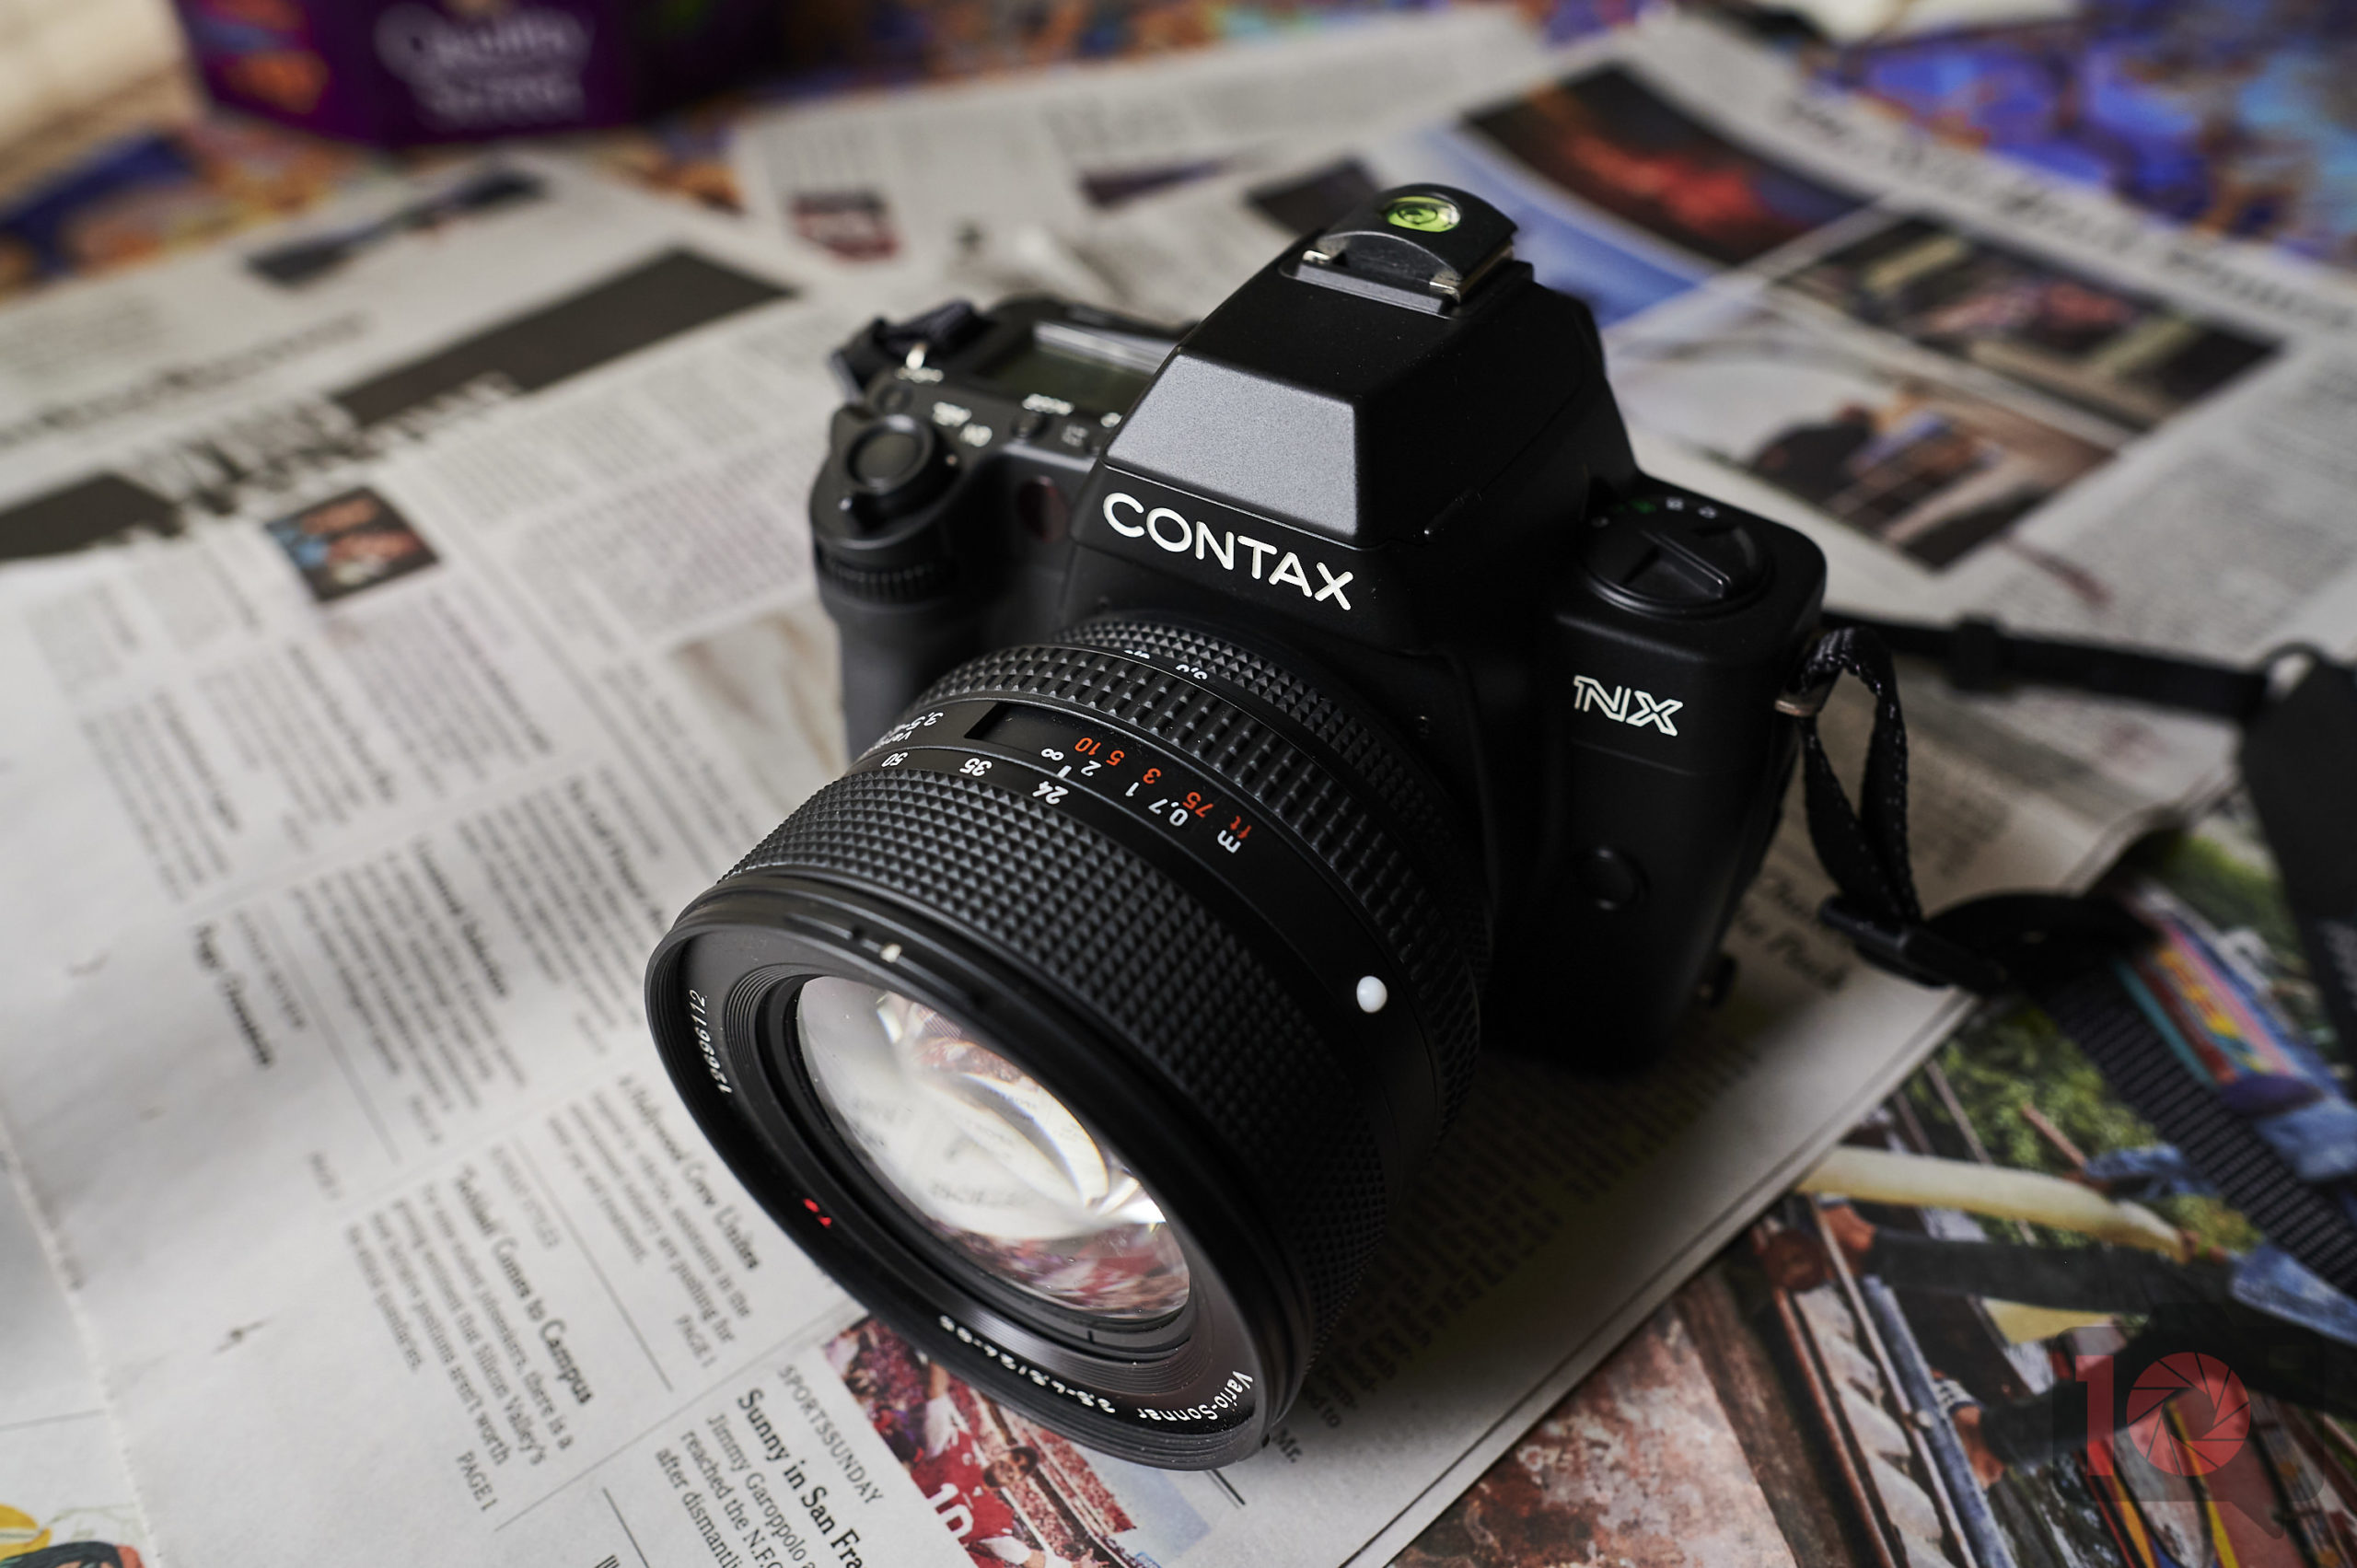 Vintage Camera Review: Contax NX (The Lil’ Contax 645, Sort Of)